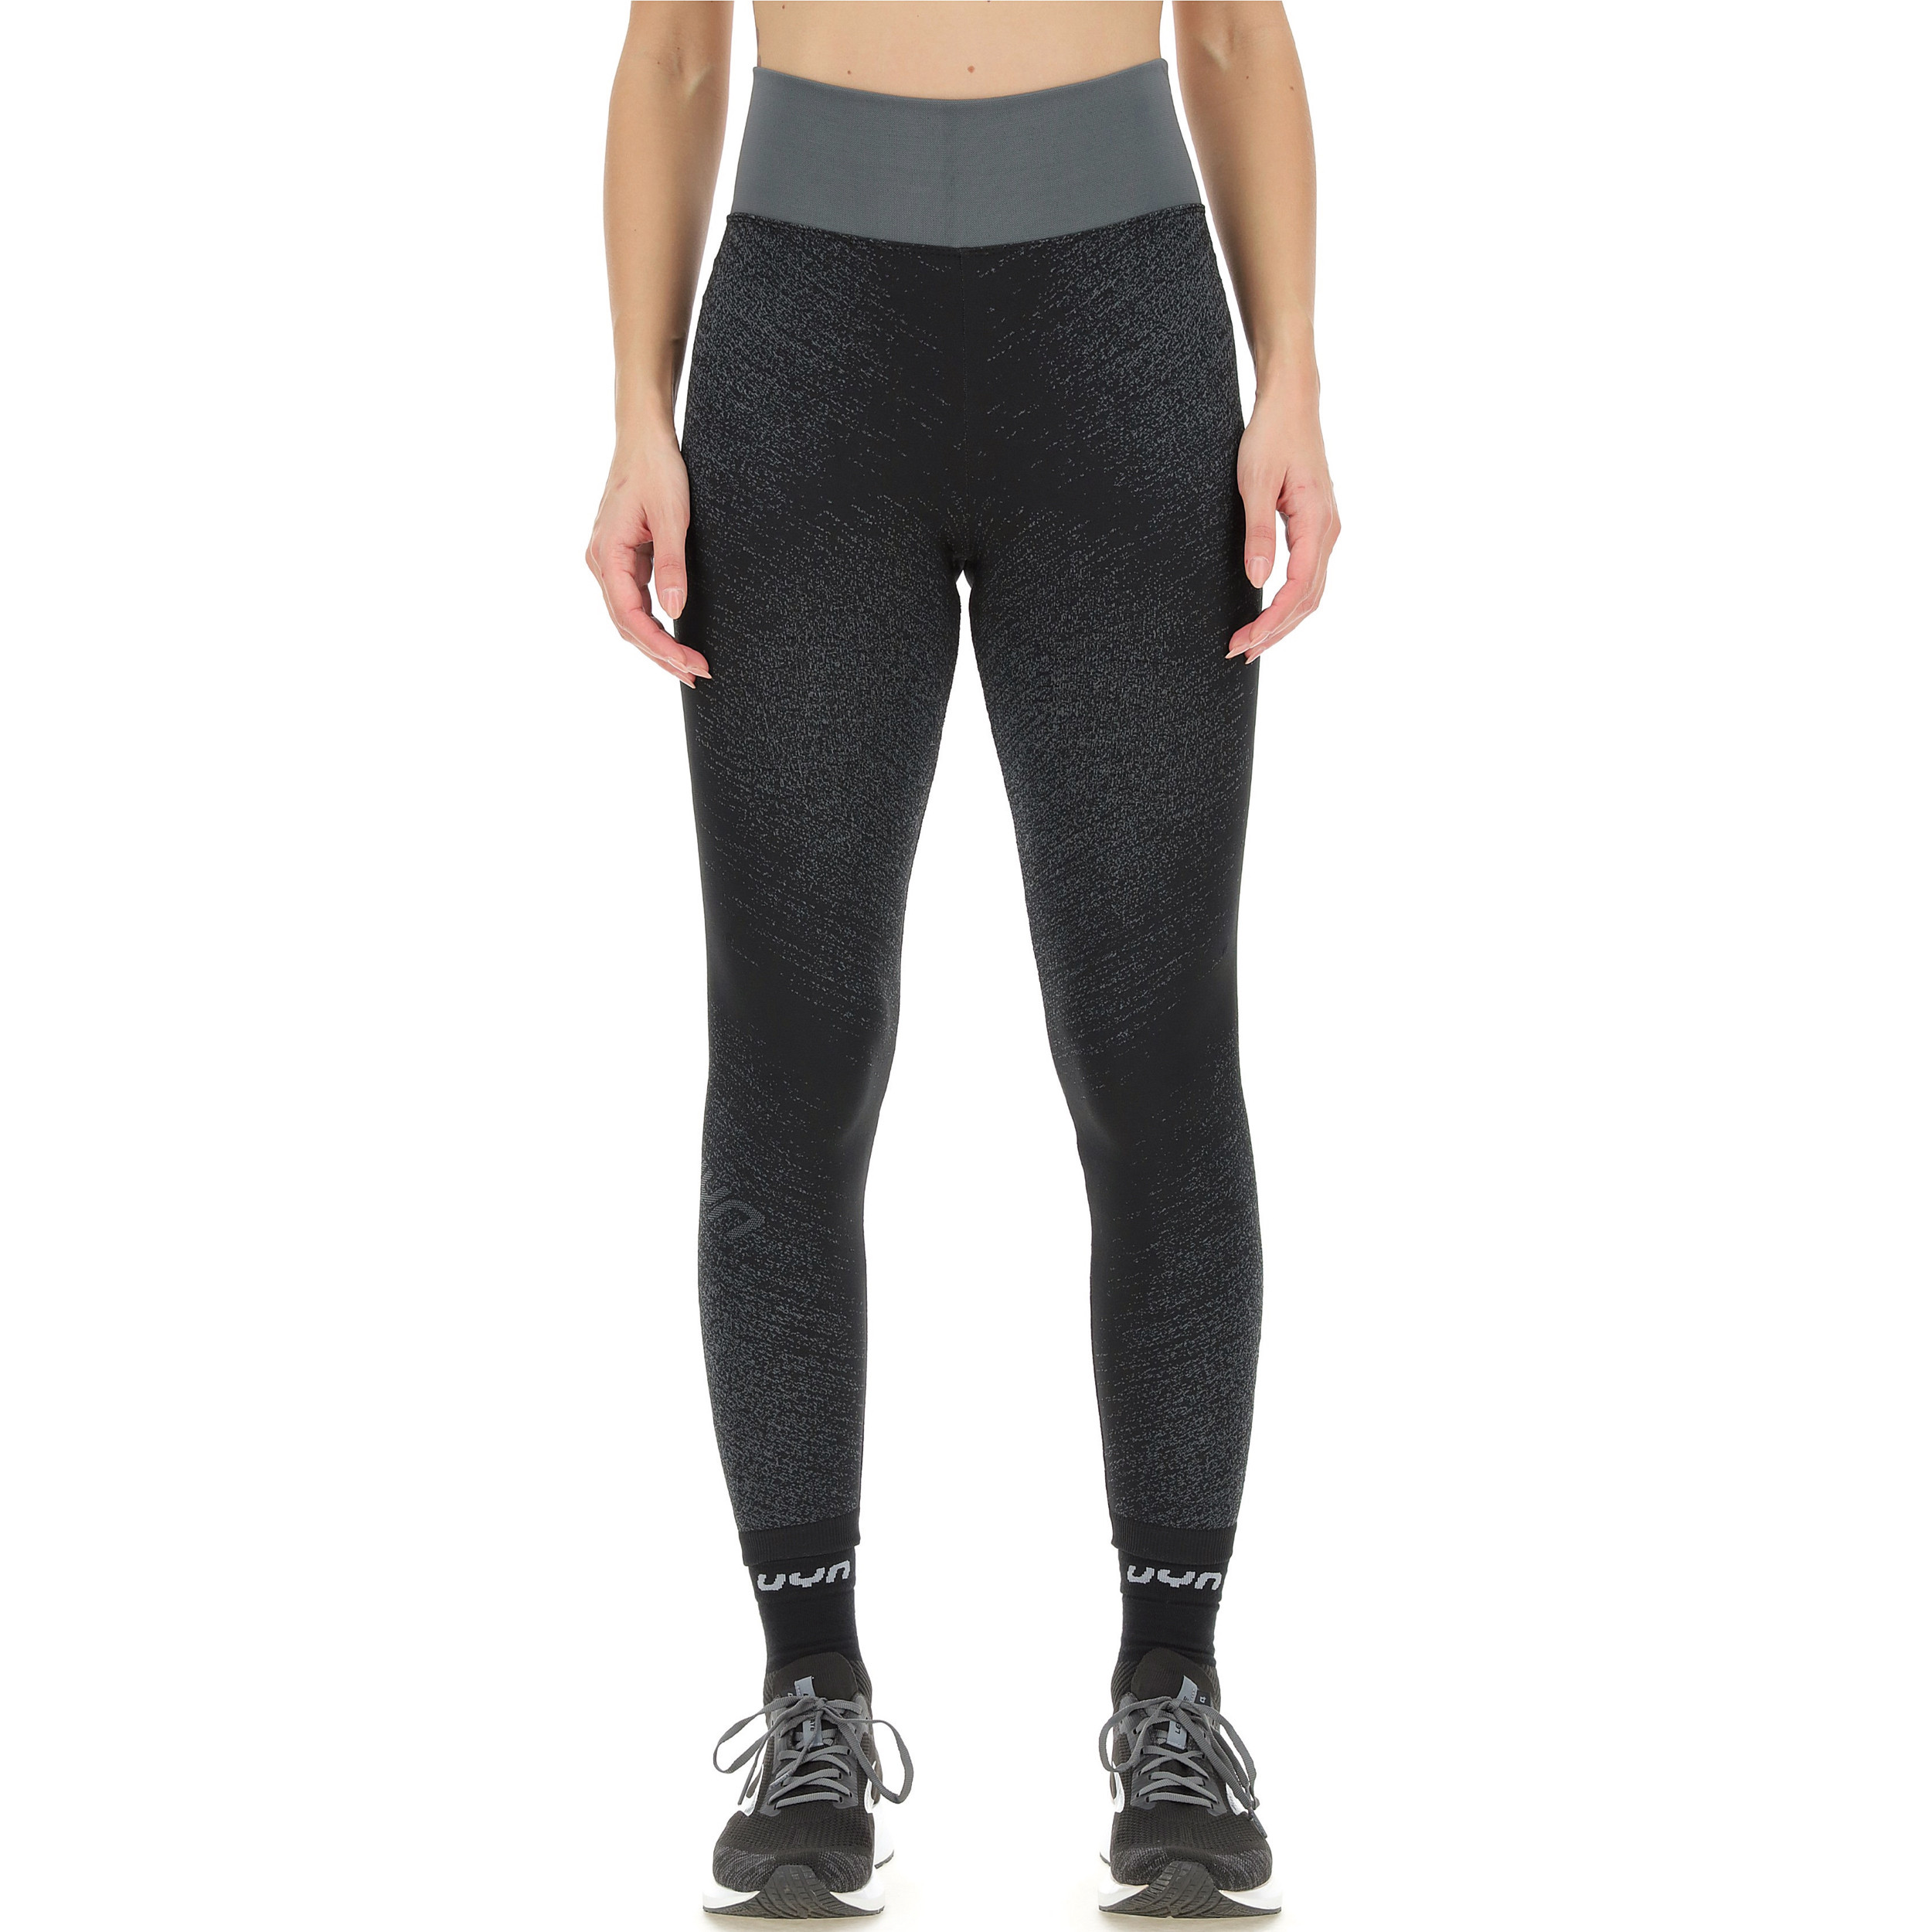 UYN LADY RUNNING EXCELERATION PANTS LONG